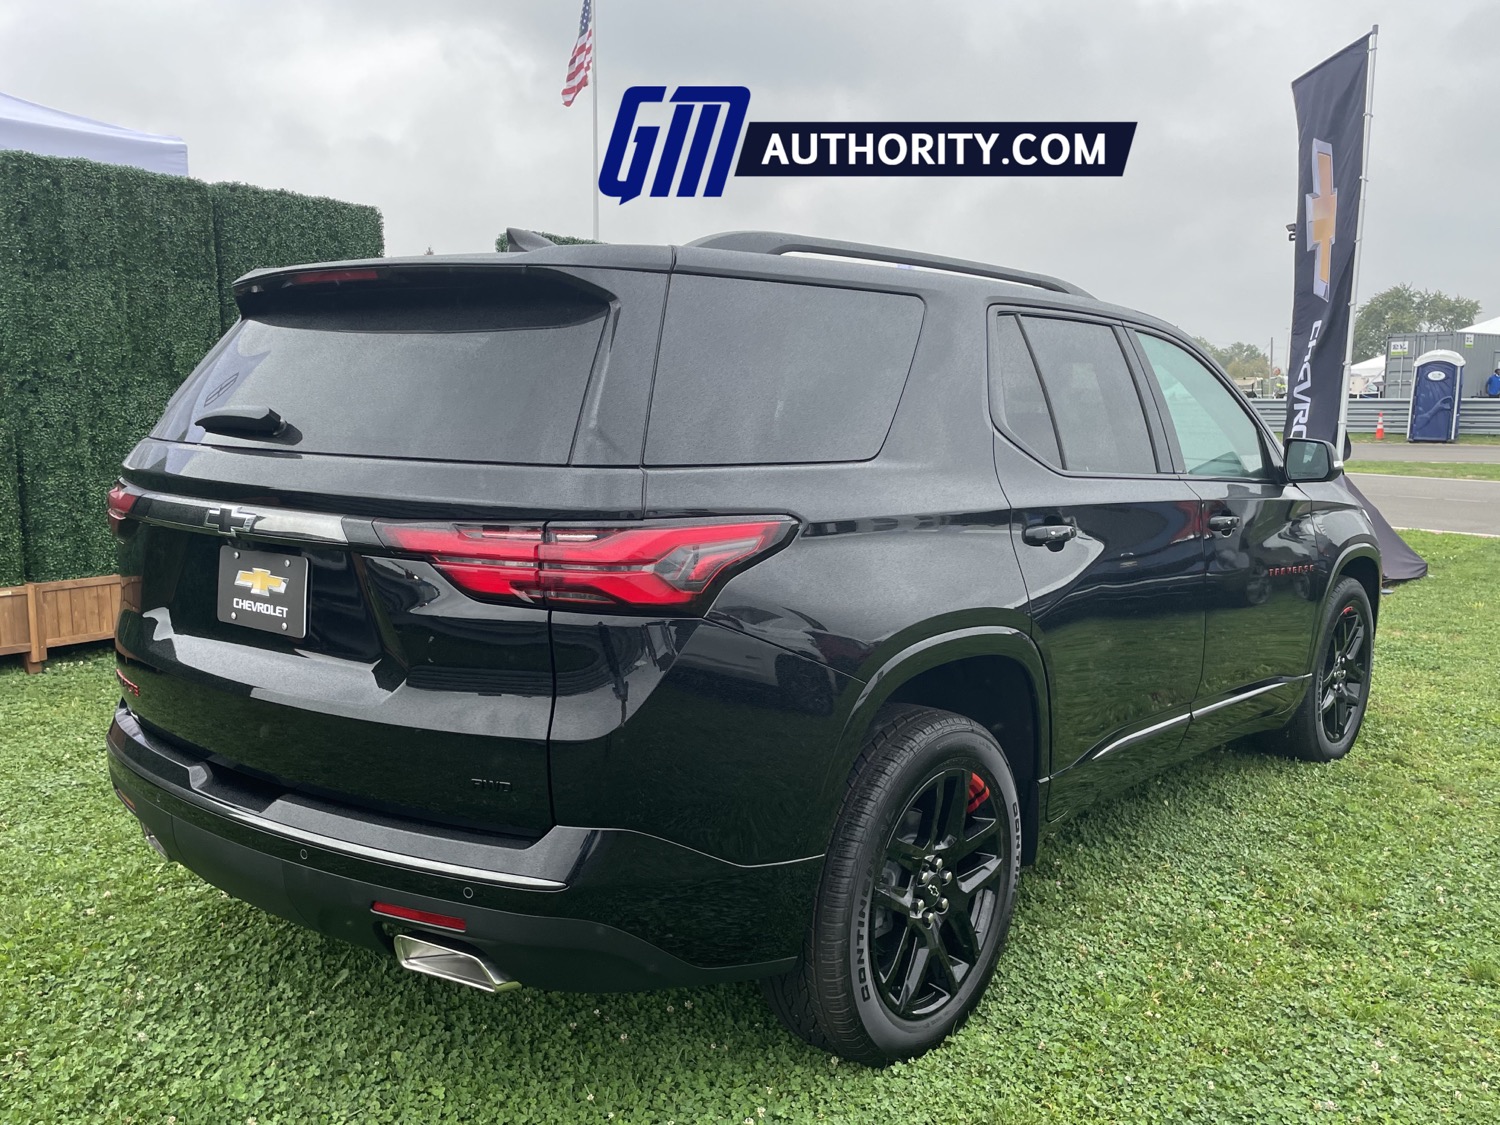 chevy-traverse-discount-offers-500-rebate-in-november-2021